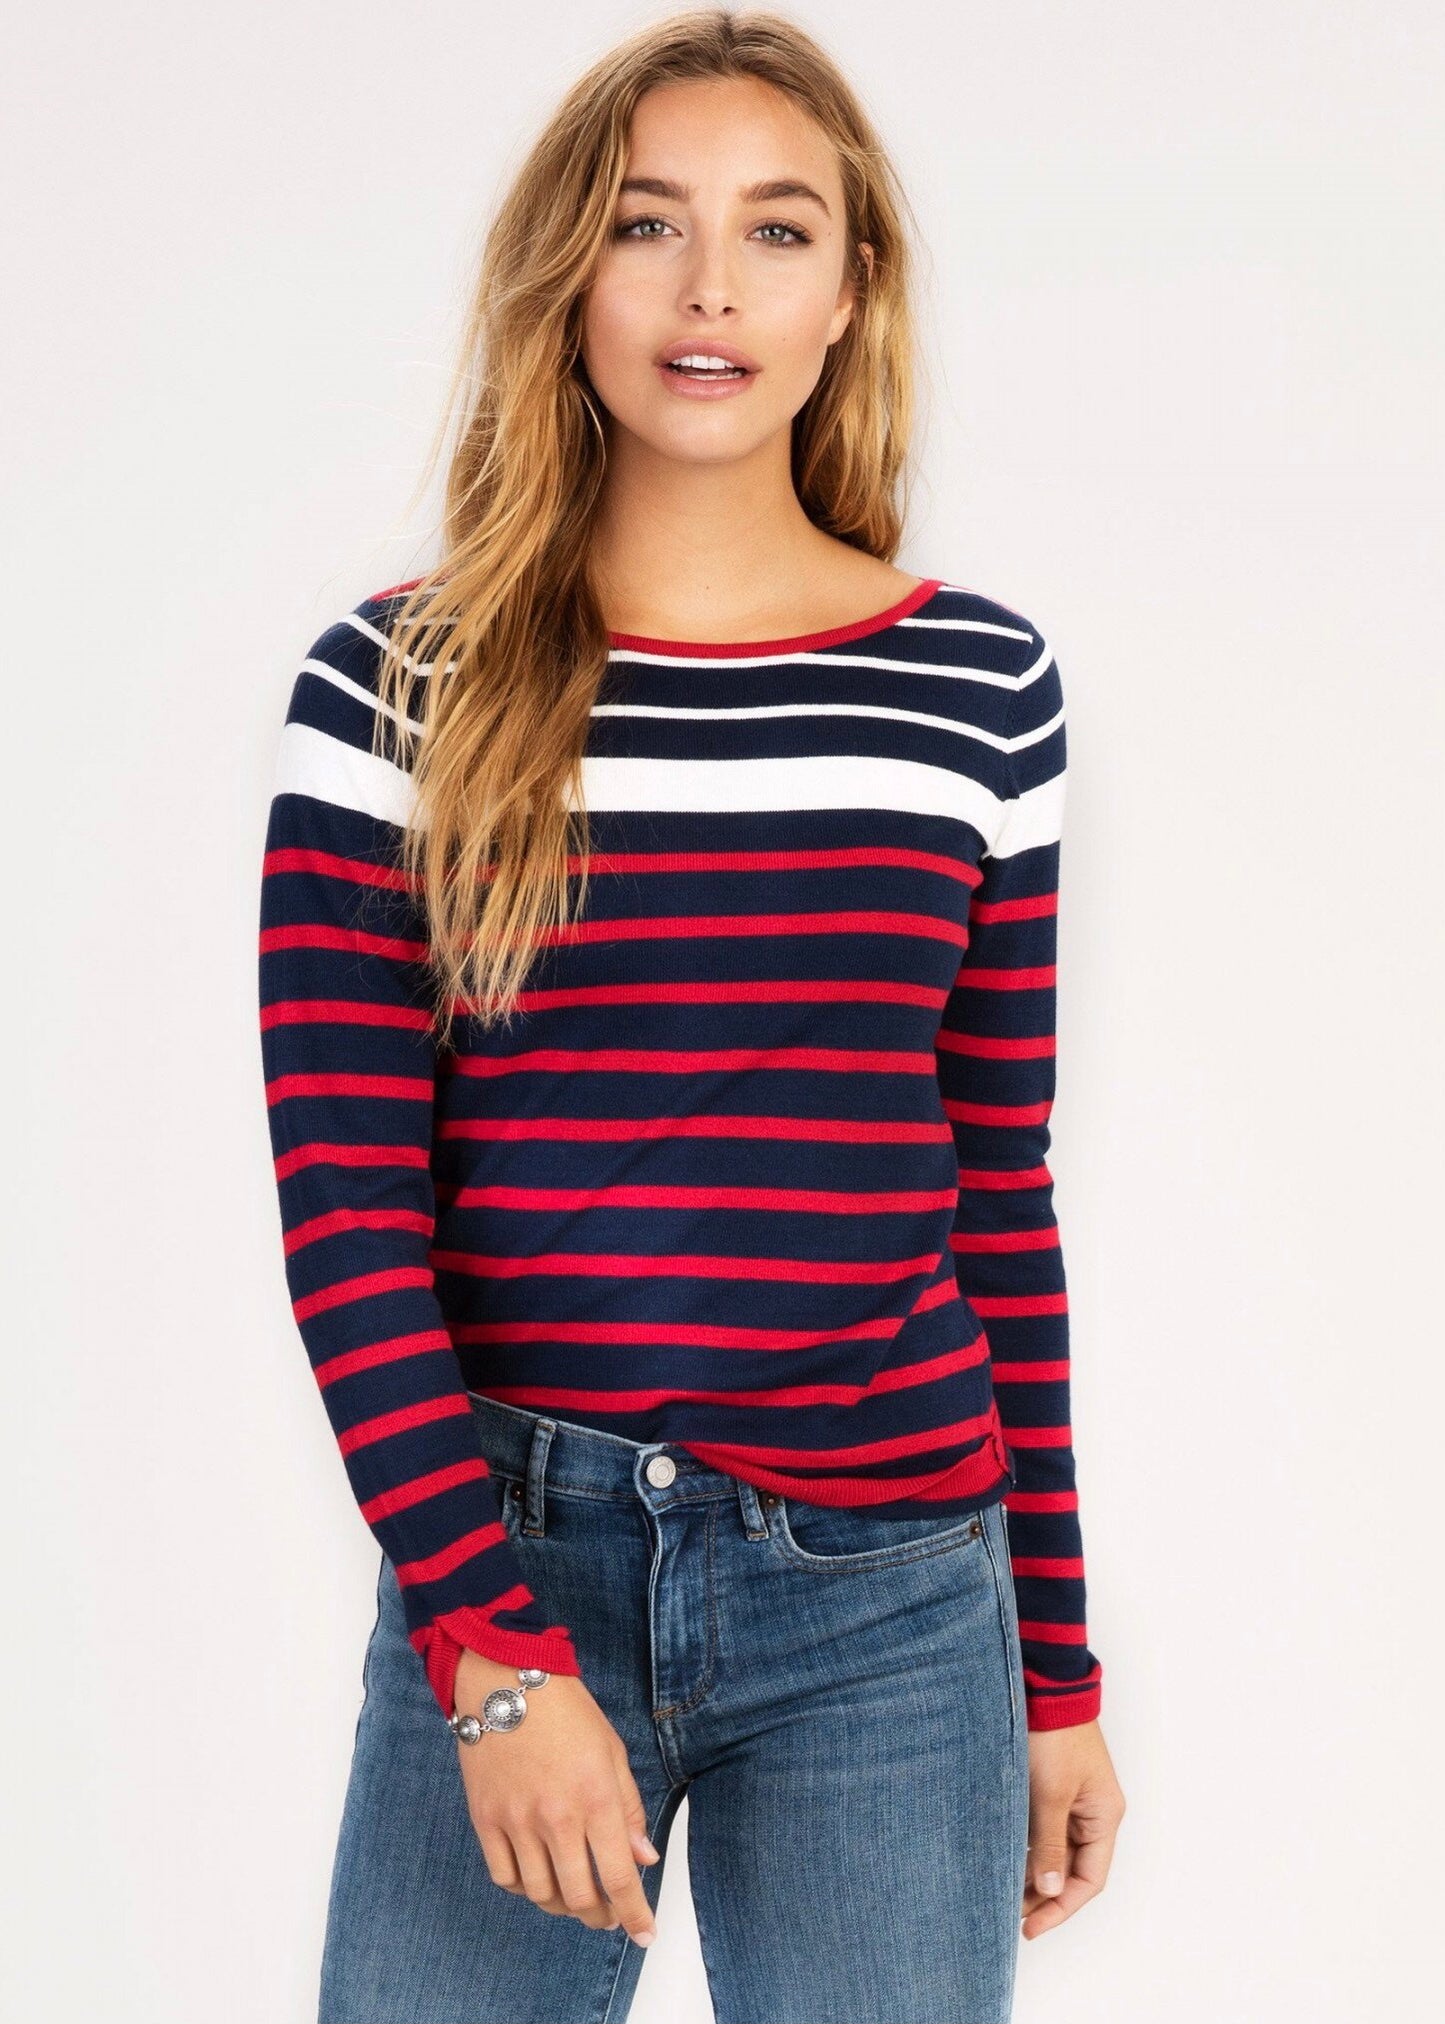 Hatley Breton Sweater - Navy and Red Stripes*